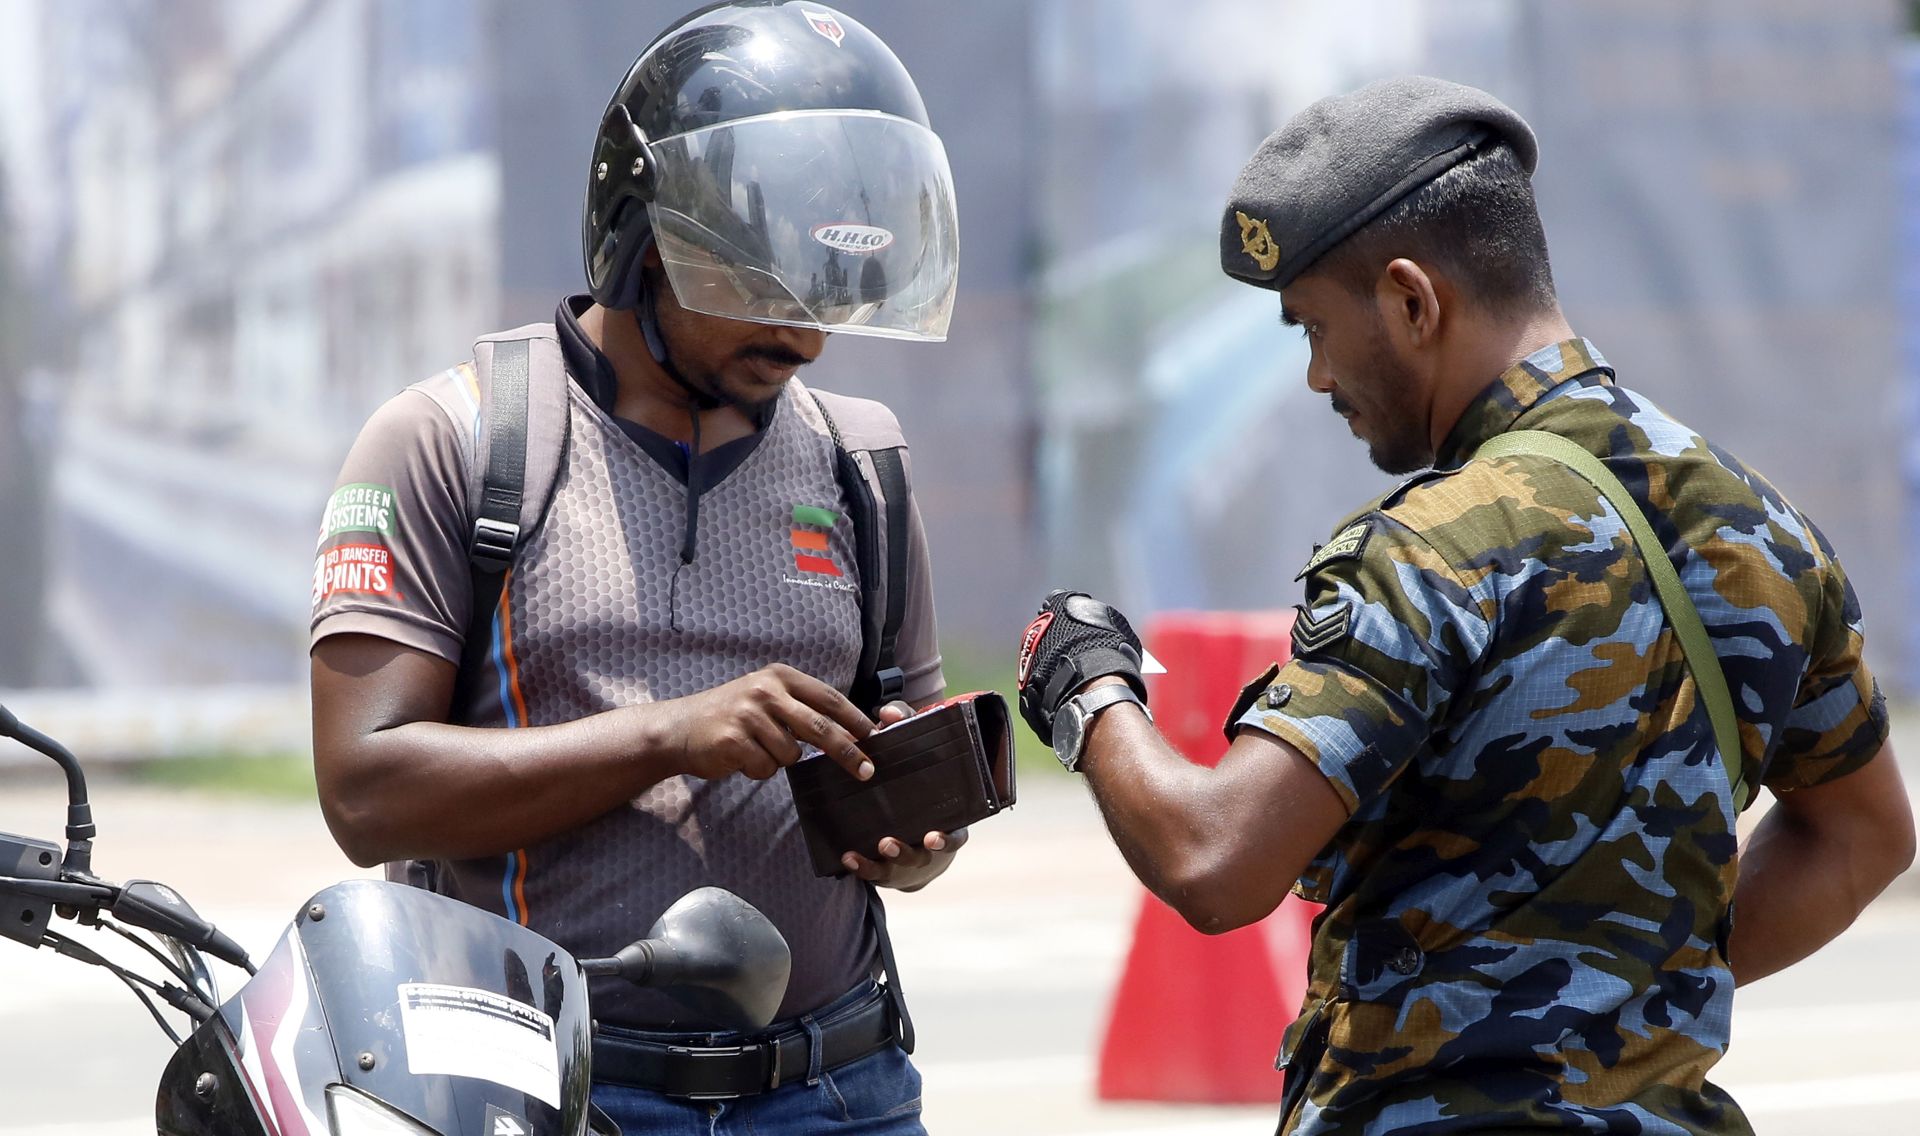 epa07526913 A Sri Lankan security officer checks driver's identity proof in Colombo, Sri Lanka, 25 April 2019. According to the news reports, most public places have no people around as security agencies continue to find suspected bomb detonators after at least 320 people were killed in a coordinated series of blasts during the Easter Sunday service at churches and hotels in Sri Lanka on 21 April 2019.  EPA/M.A. PUSHPA KUMARA